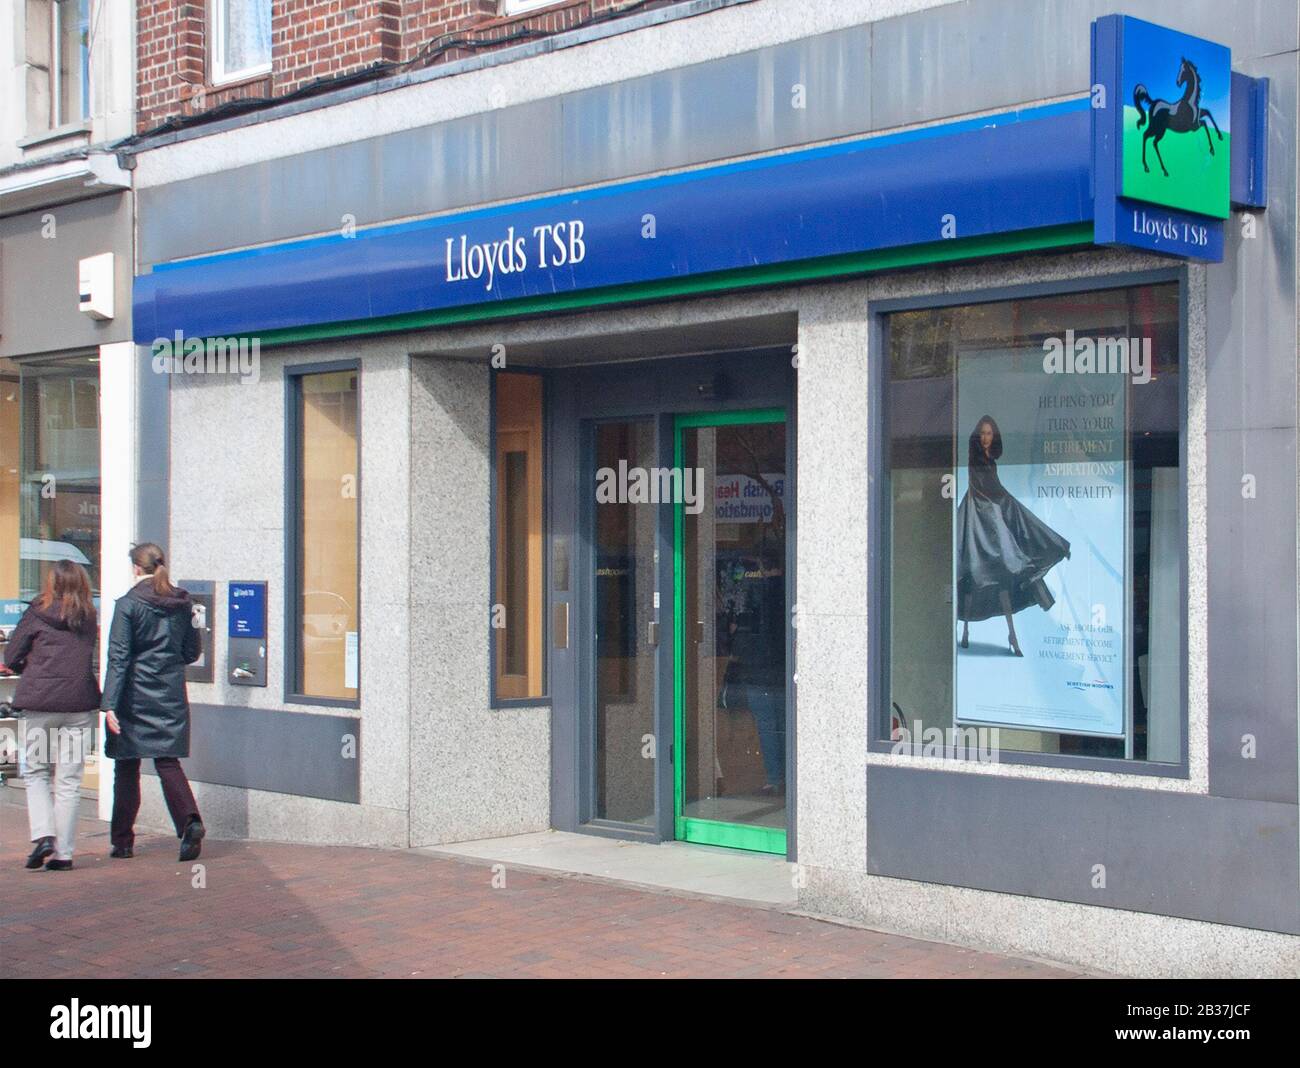 Archive historical Lloyds TSB blue bank sign & entrance shop front window advertising display Scottish Widows  retirement income Brentwood Essex UK Stock Photo